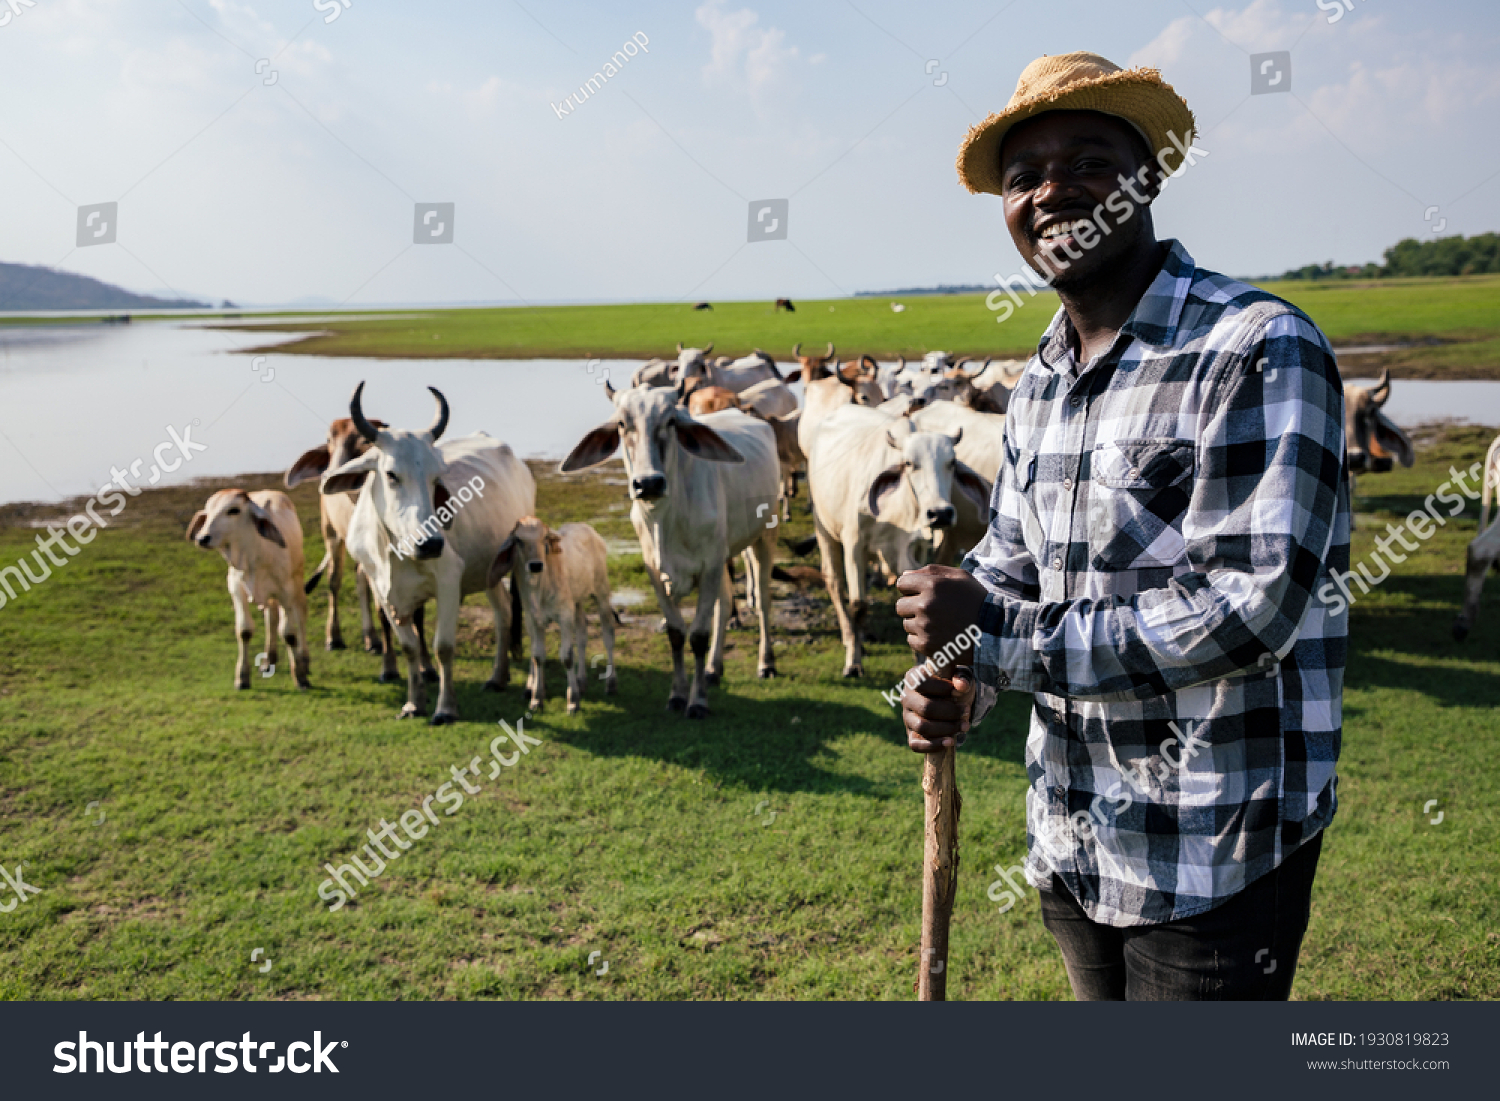 Africa American man feed and care the subsistence of cows in local farm near river and using a wood for control livestock. A farmer is a profession that requires patience and diligence #1930819823